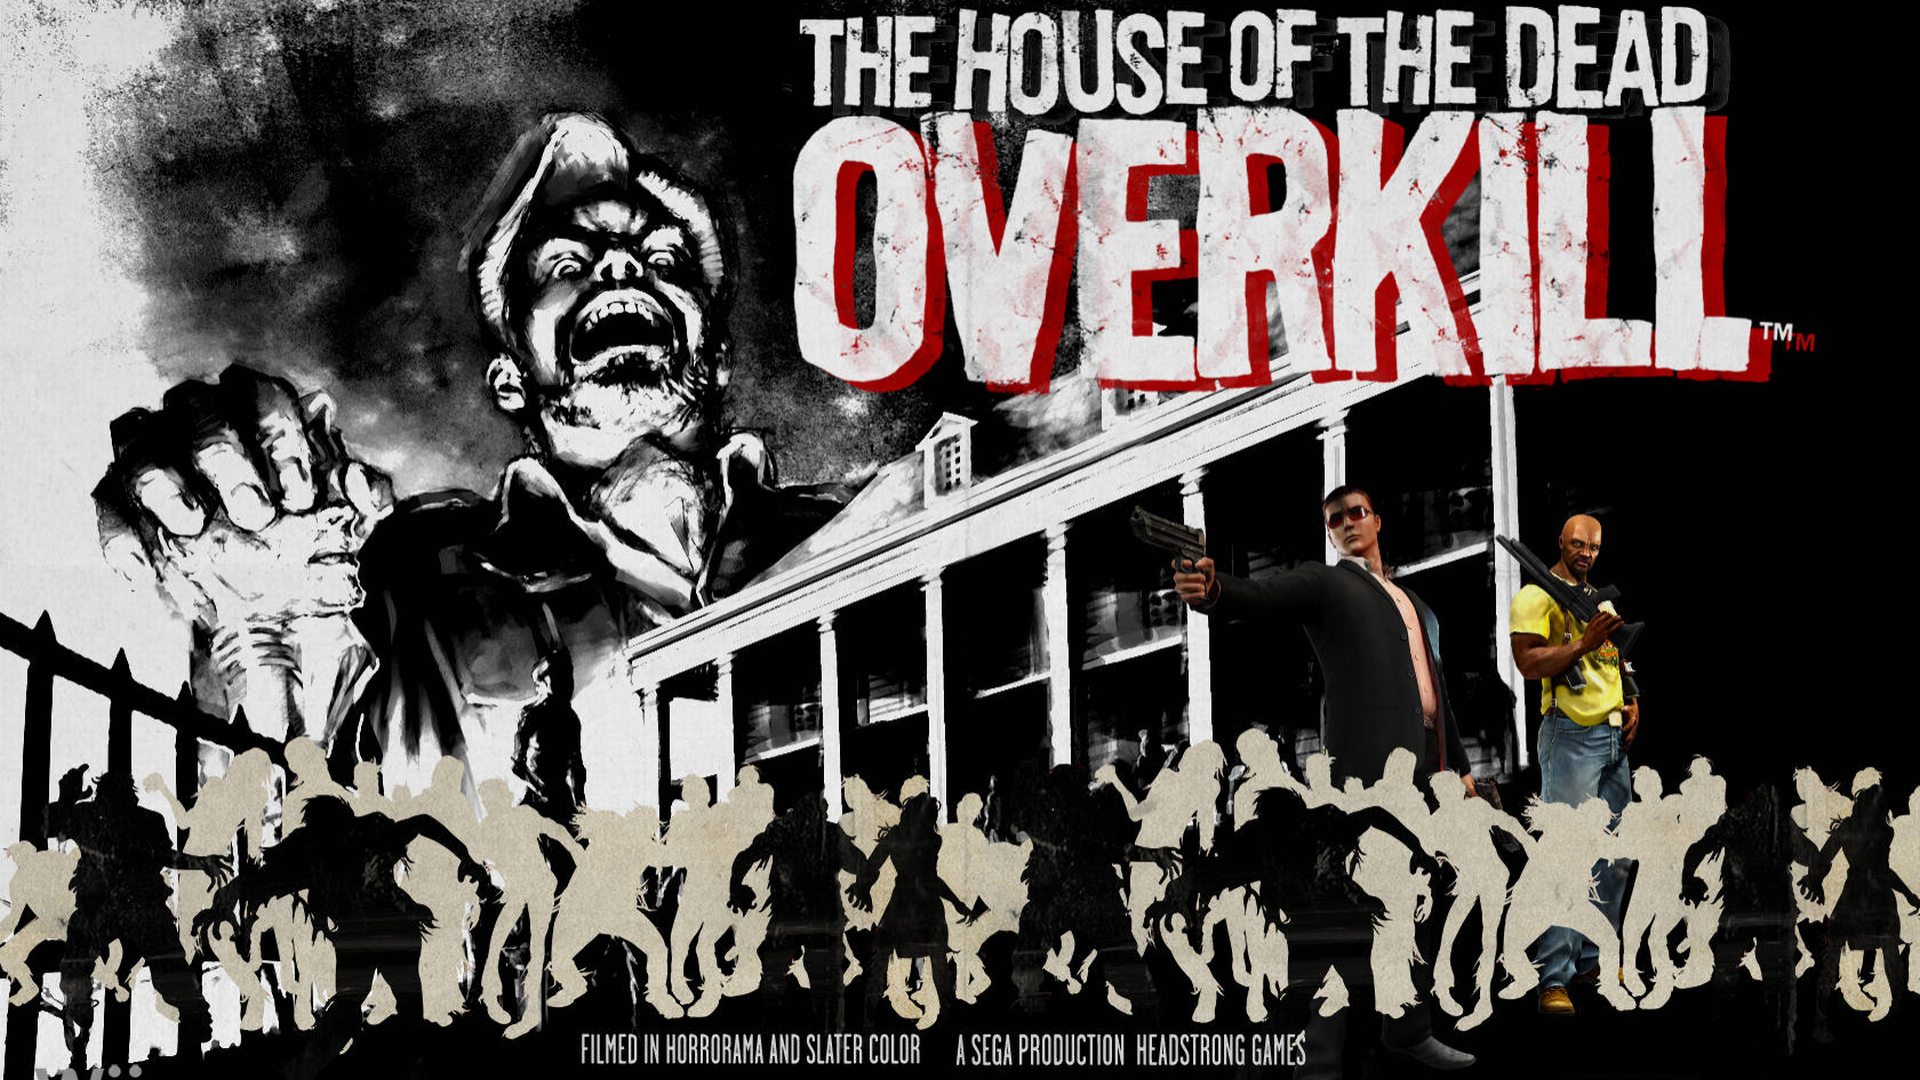 The House Of The Dead: Overkill #23